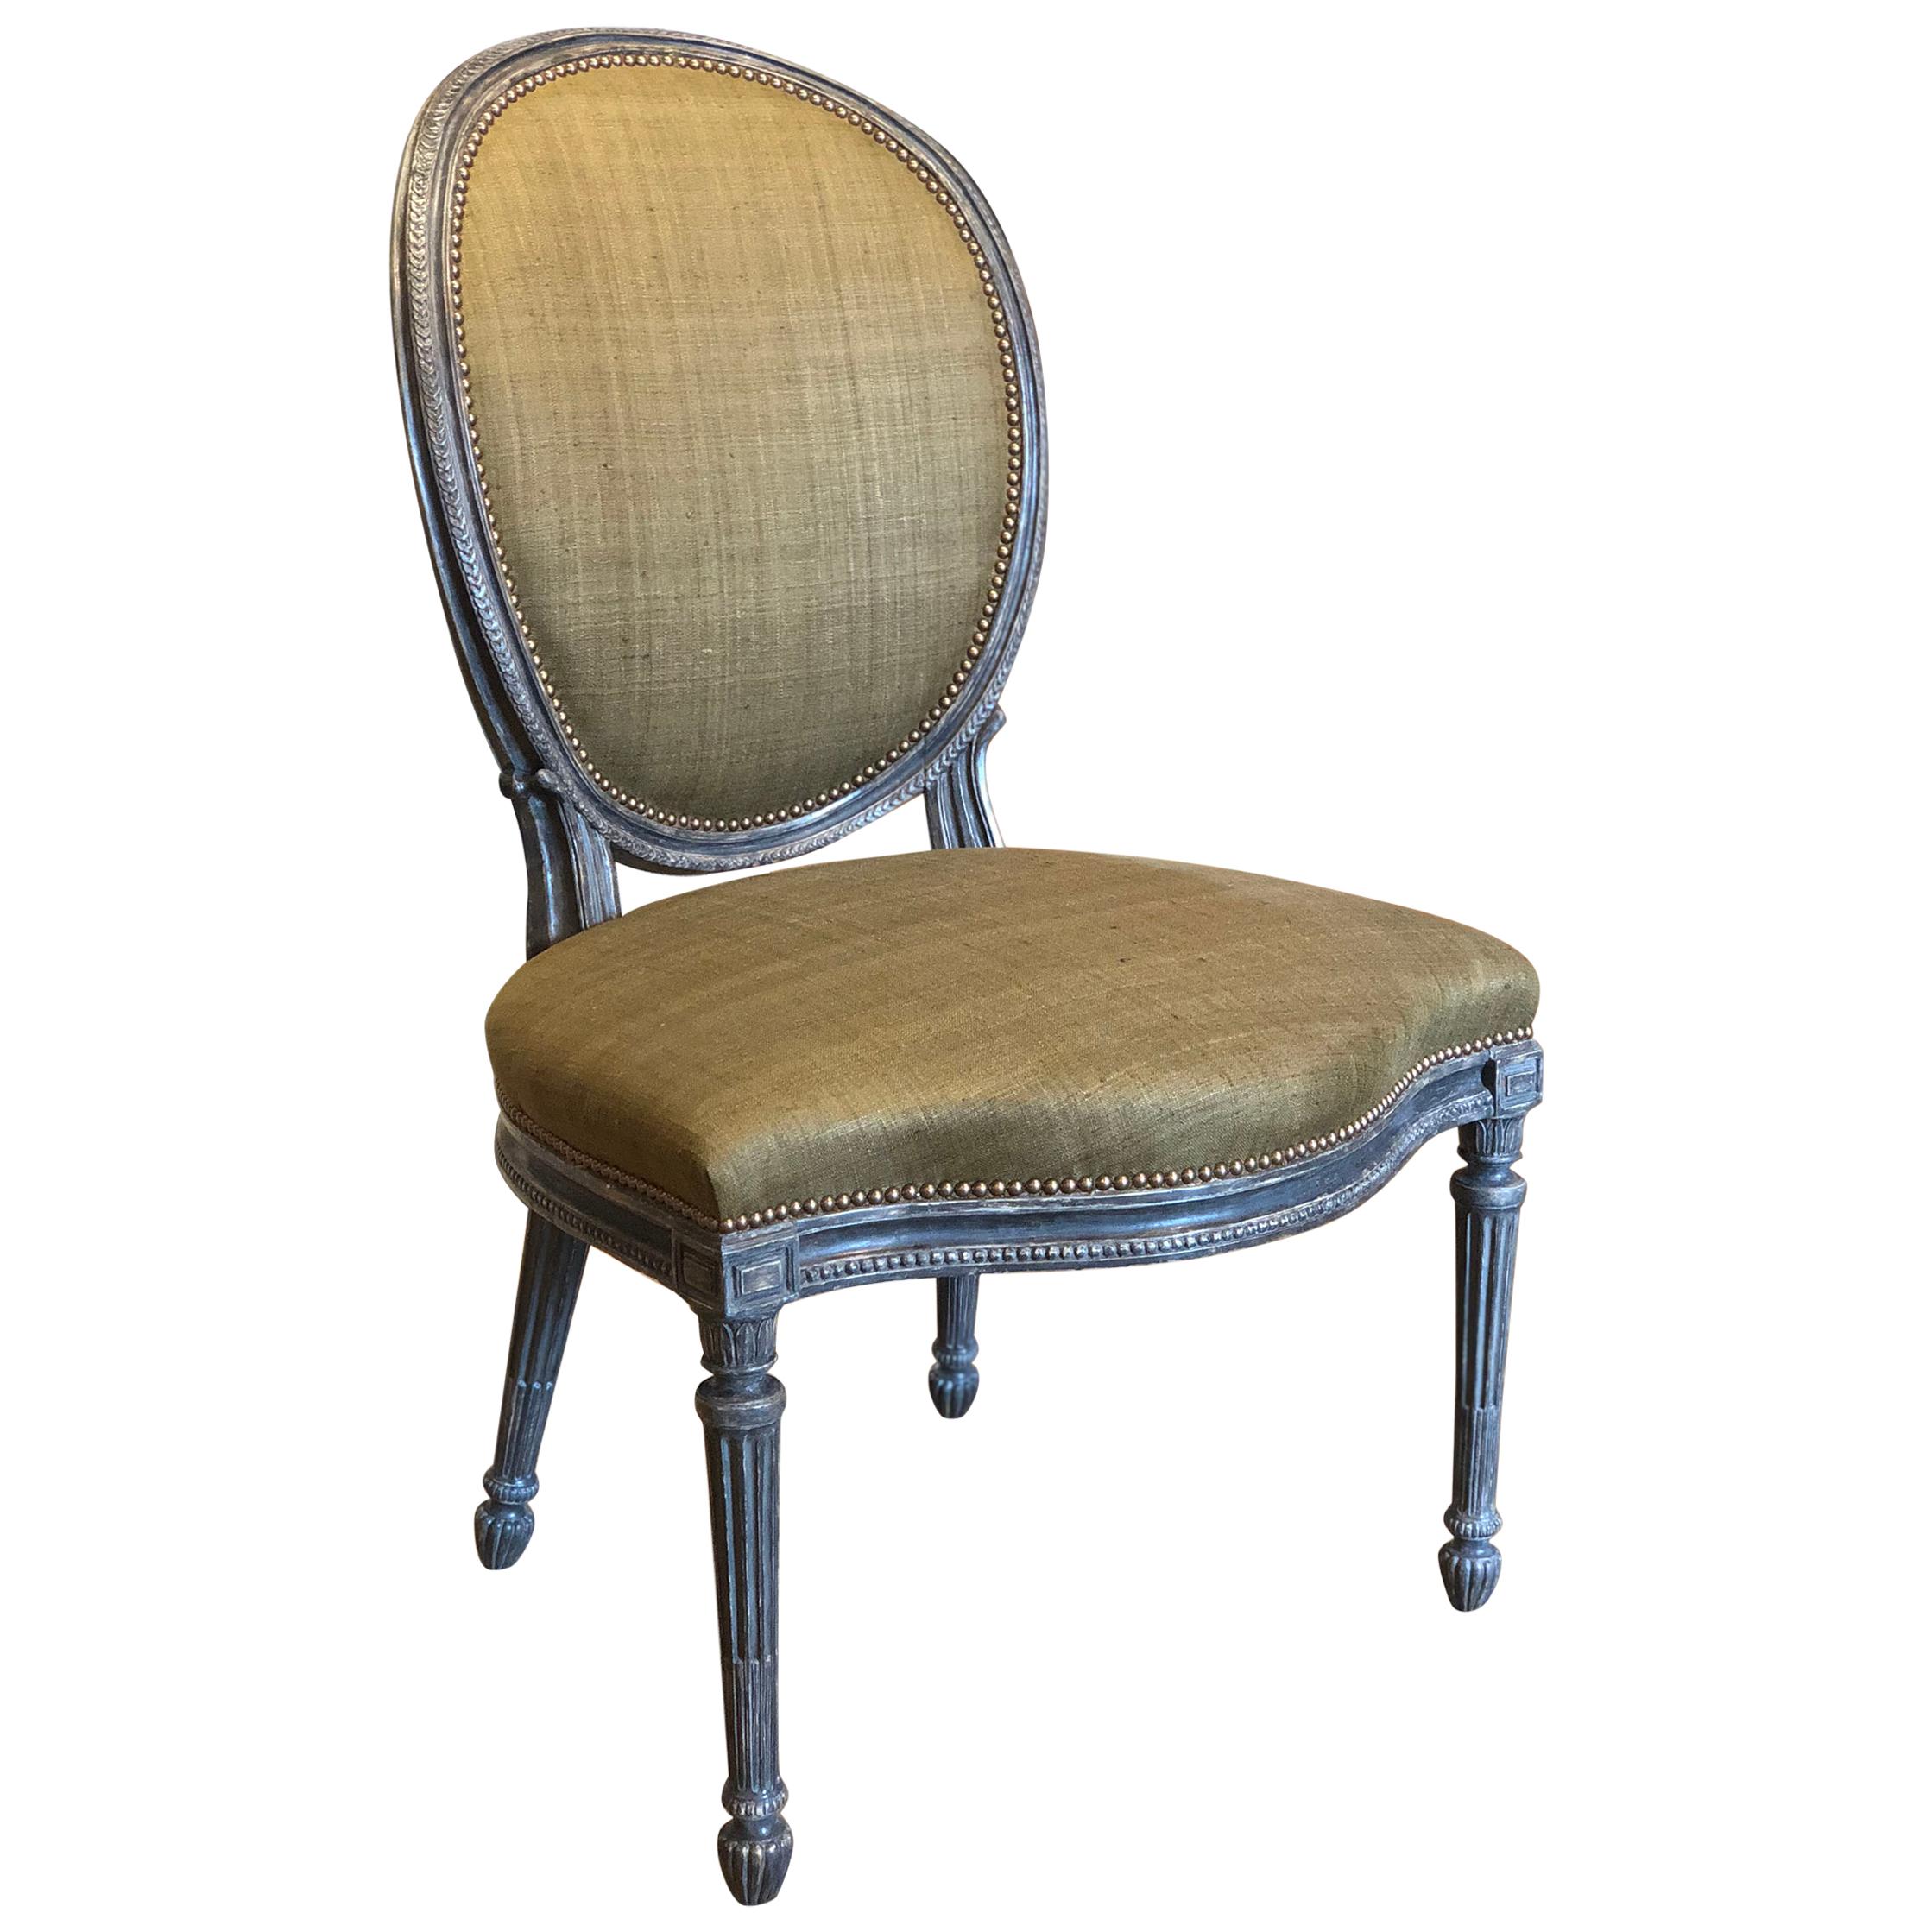 Adam Painted Side Chair Attributed to Thomas Chippendale